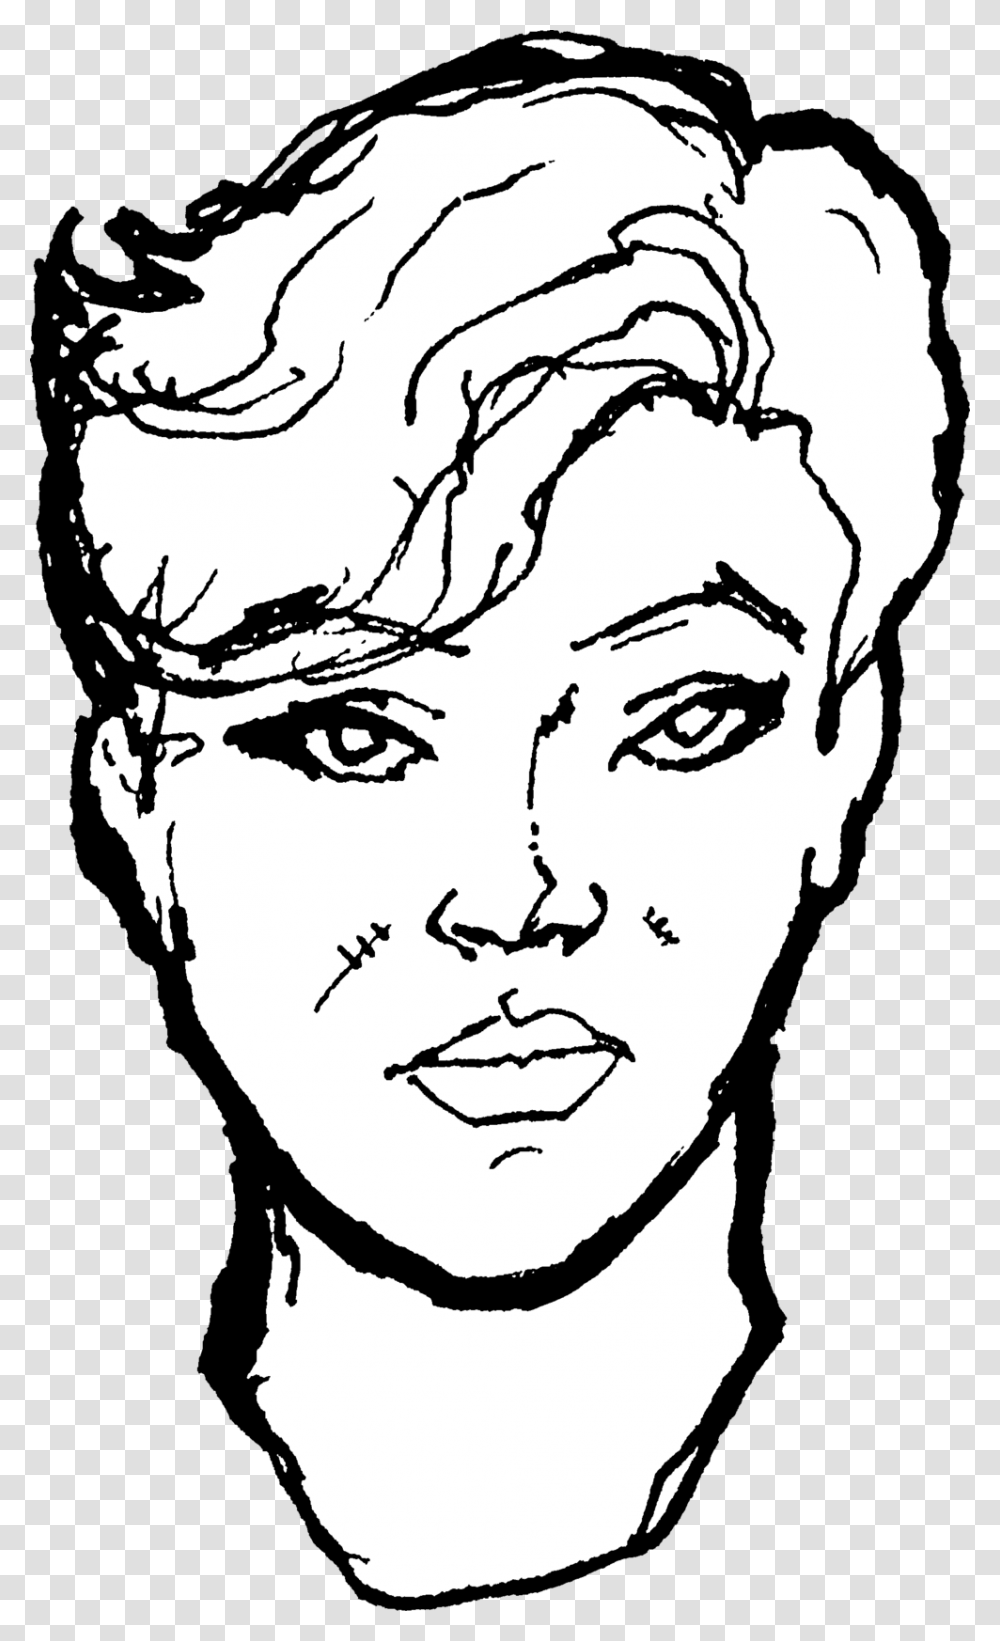 Woman With Short Hair Download Sketch, Face, Person, Human, Head Transparent Png